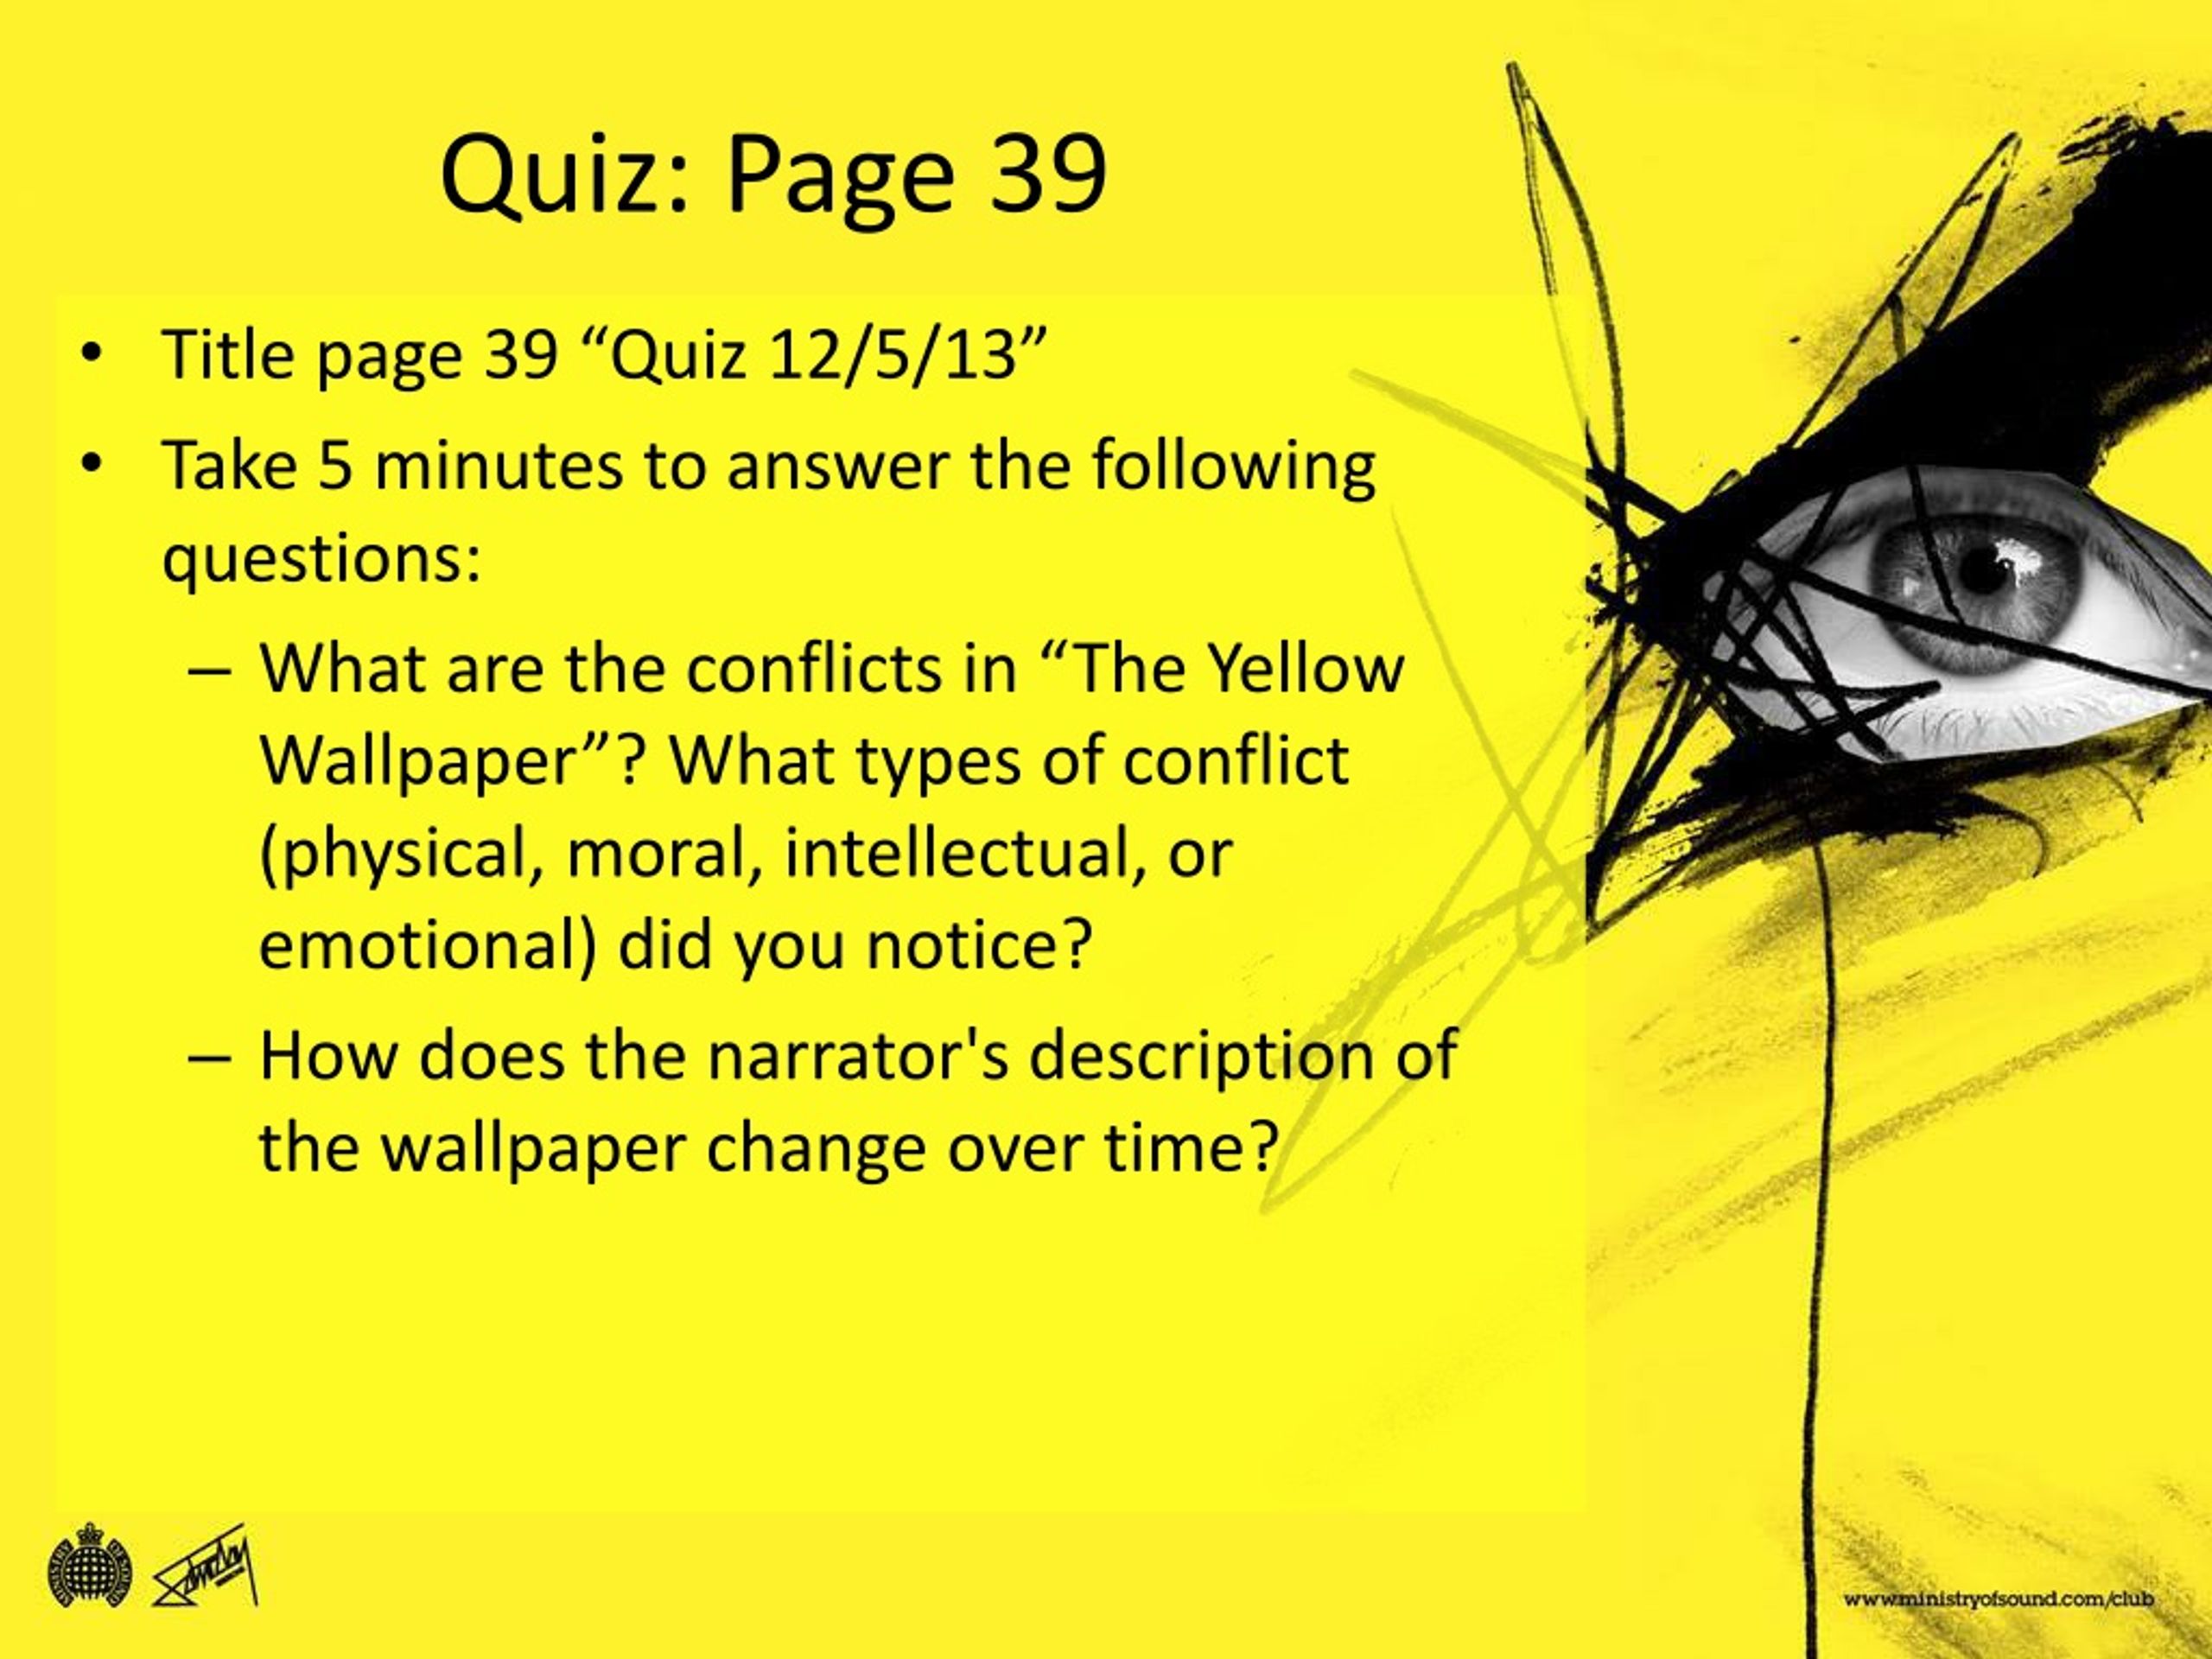 The Yellow Wallpaper Short Story Comprehension and Analysis Questions   Simply Novel